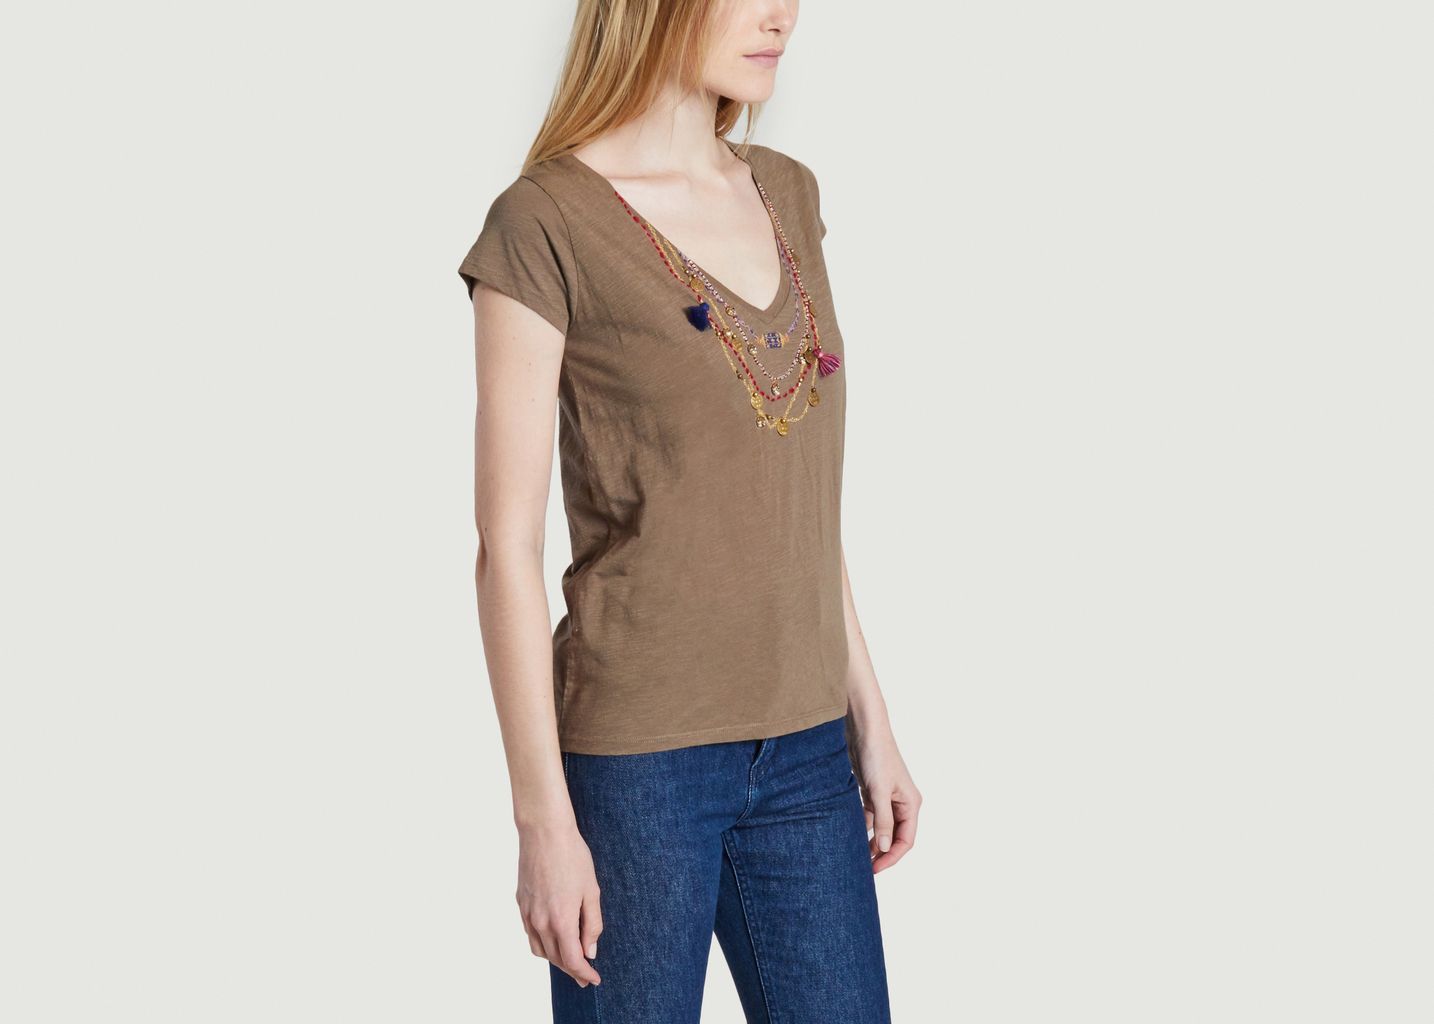 Organic cotton t-shirt with necklace pattern Tonton Medail - Leon & Harper